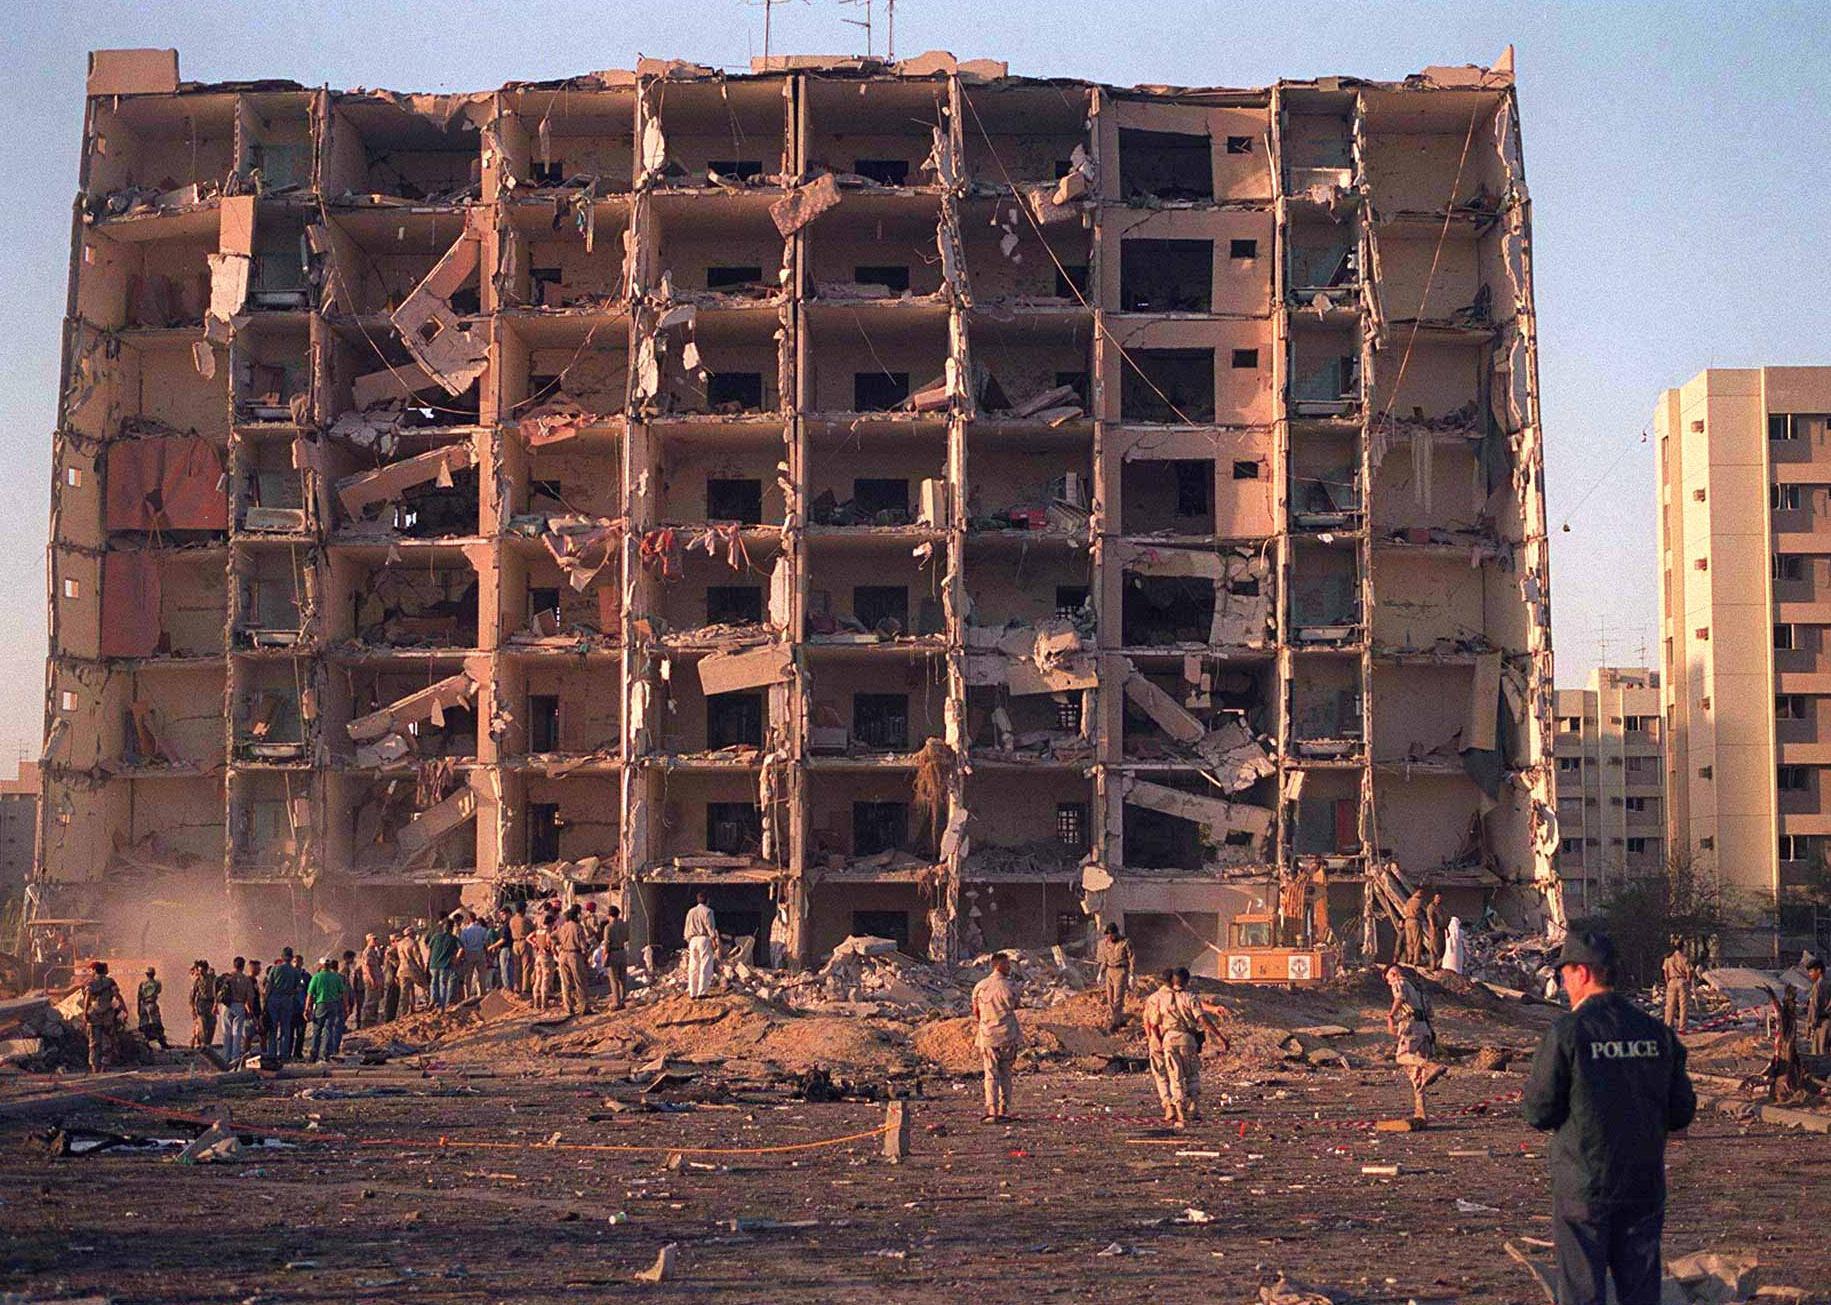 Khobar Towers after an explosion.